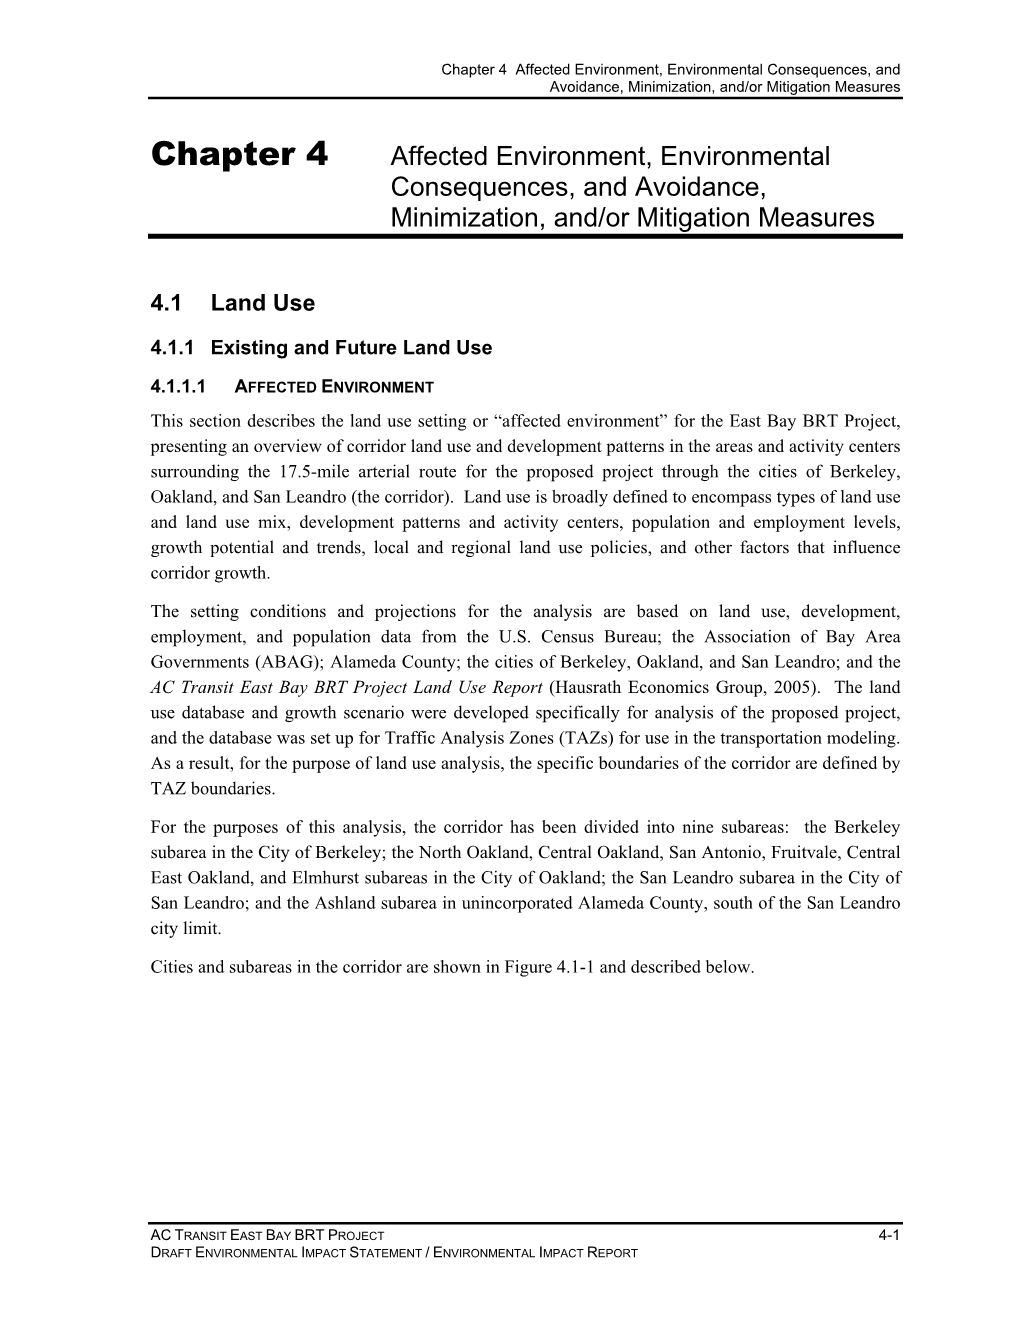 Chapter 4 Affected Environment, Environmental Consequences, and Avoidance, Minimization, And/Or Mitigation Measures